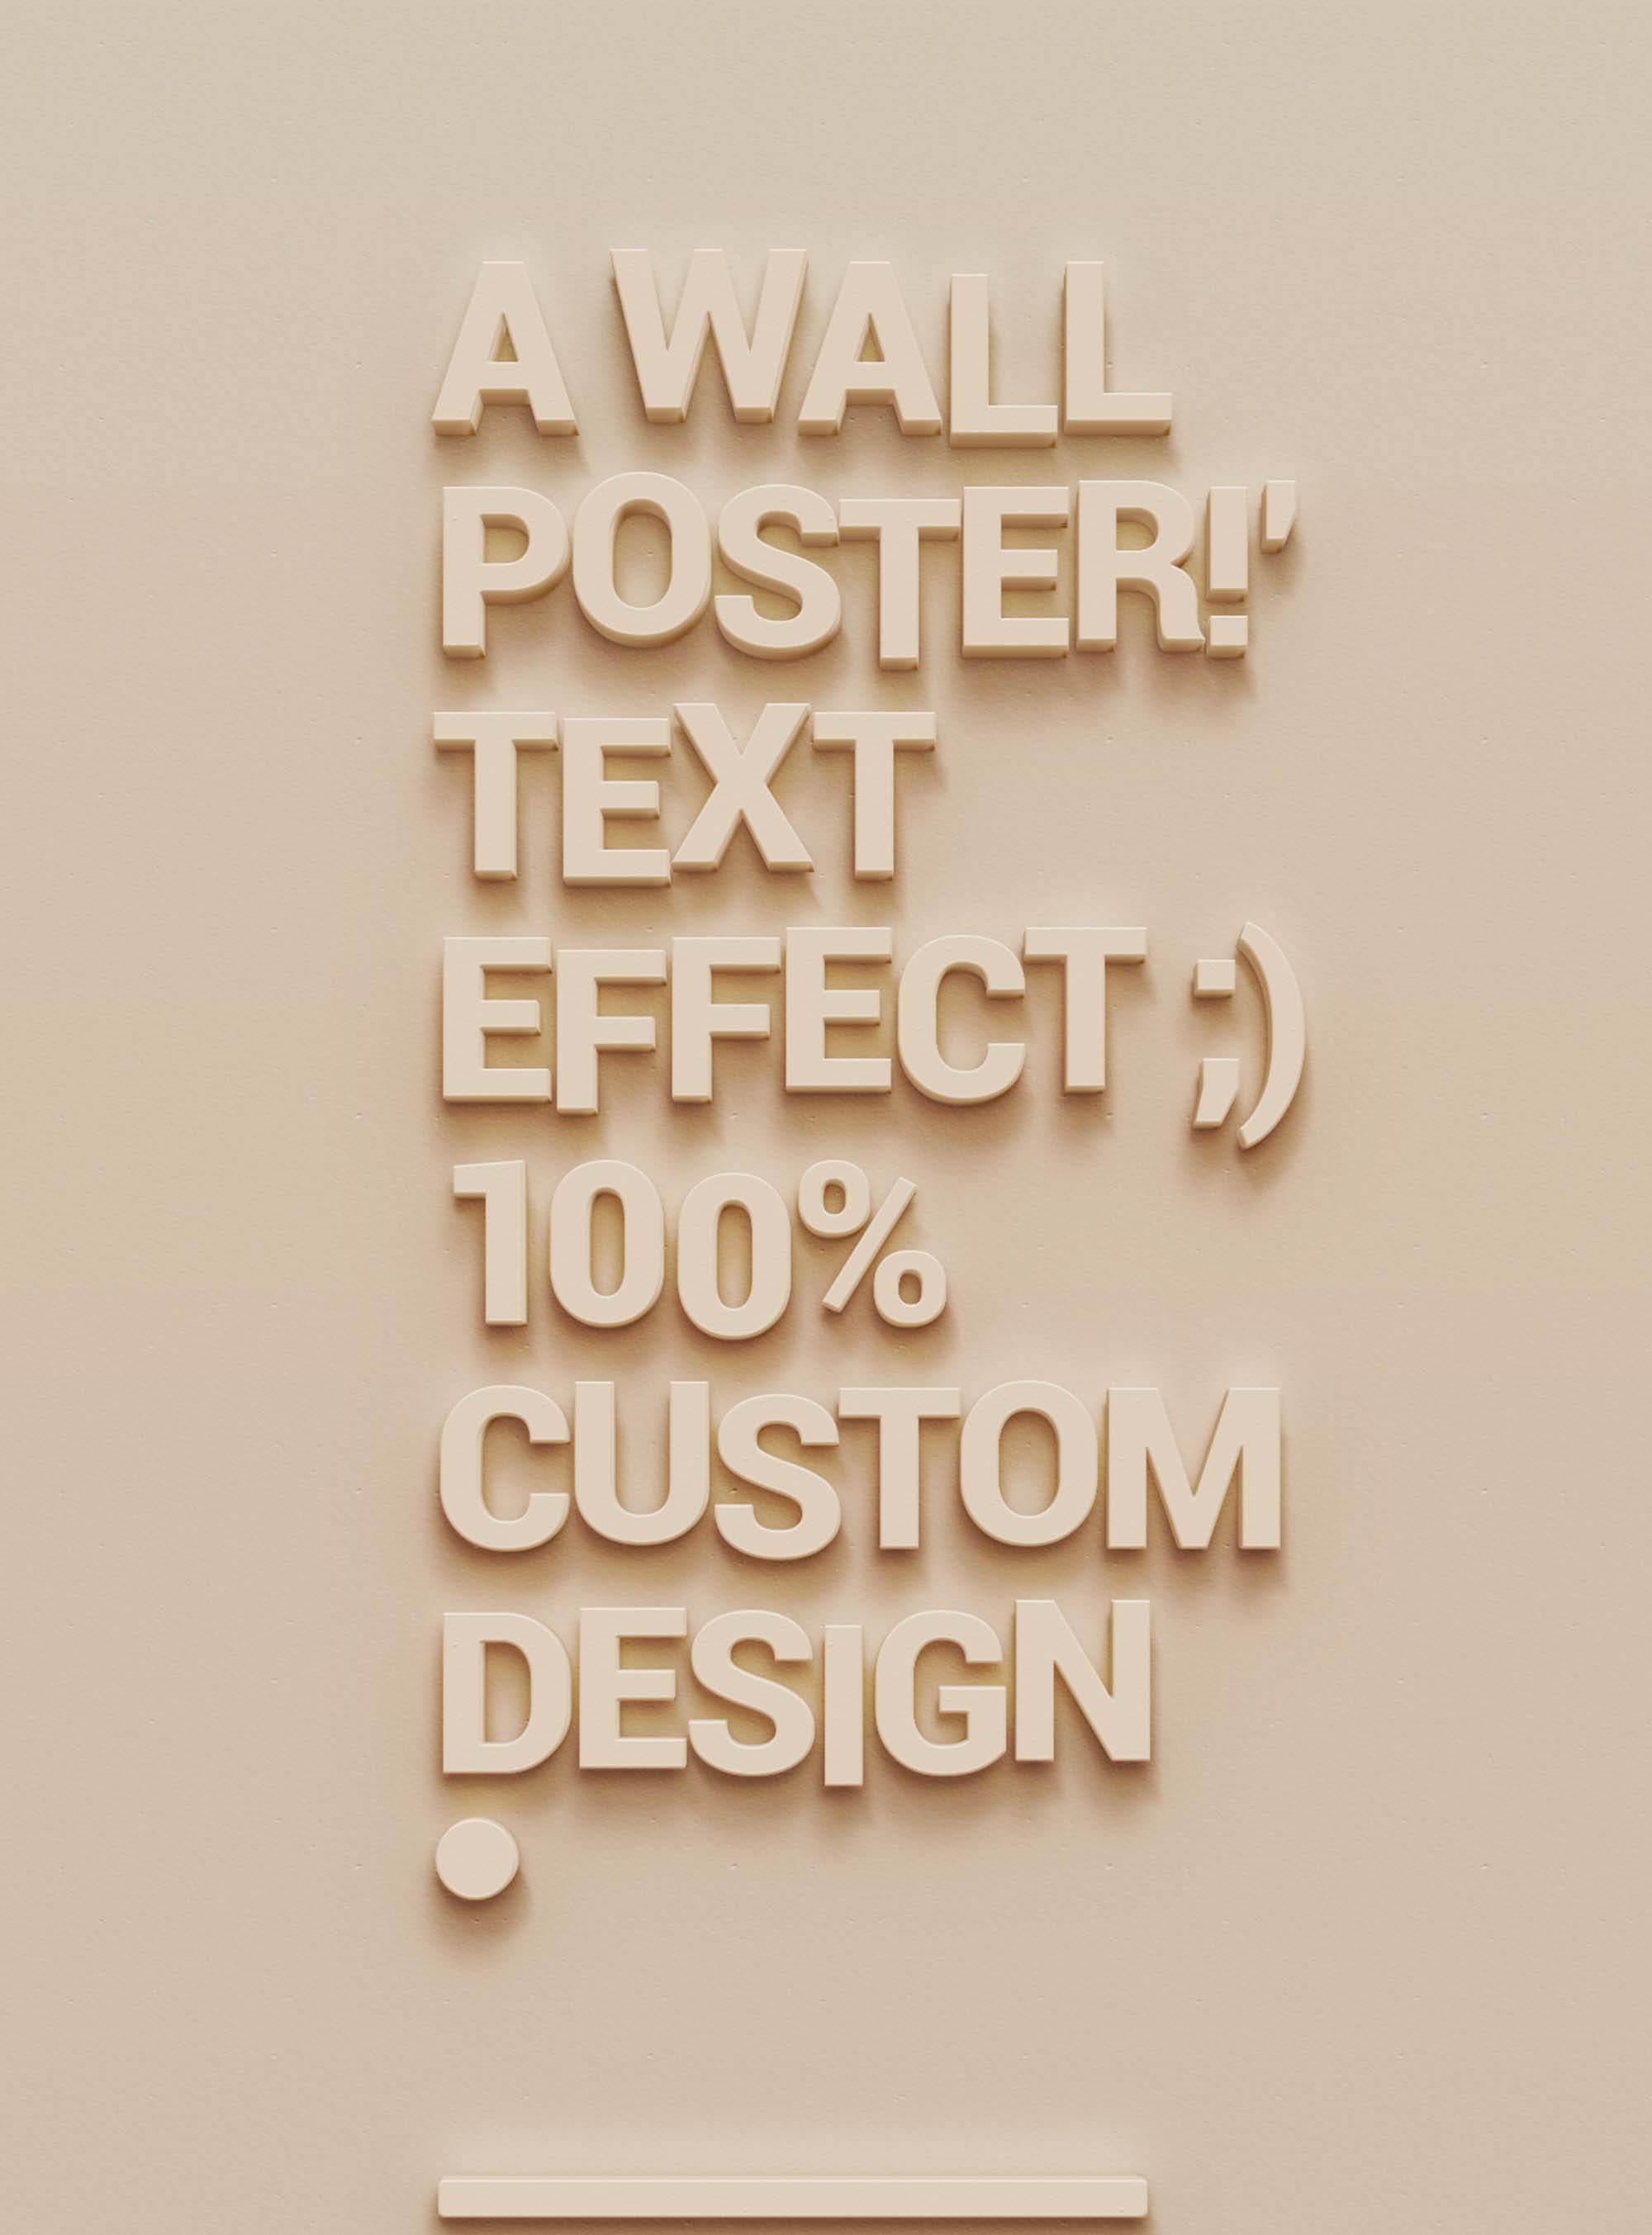 Top 3D Wall Poster Text Effect